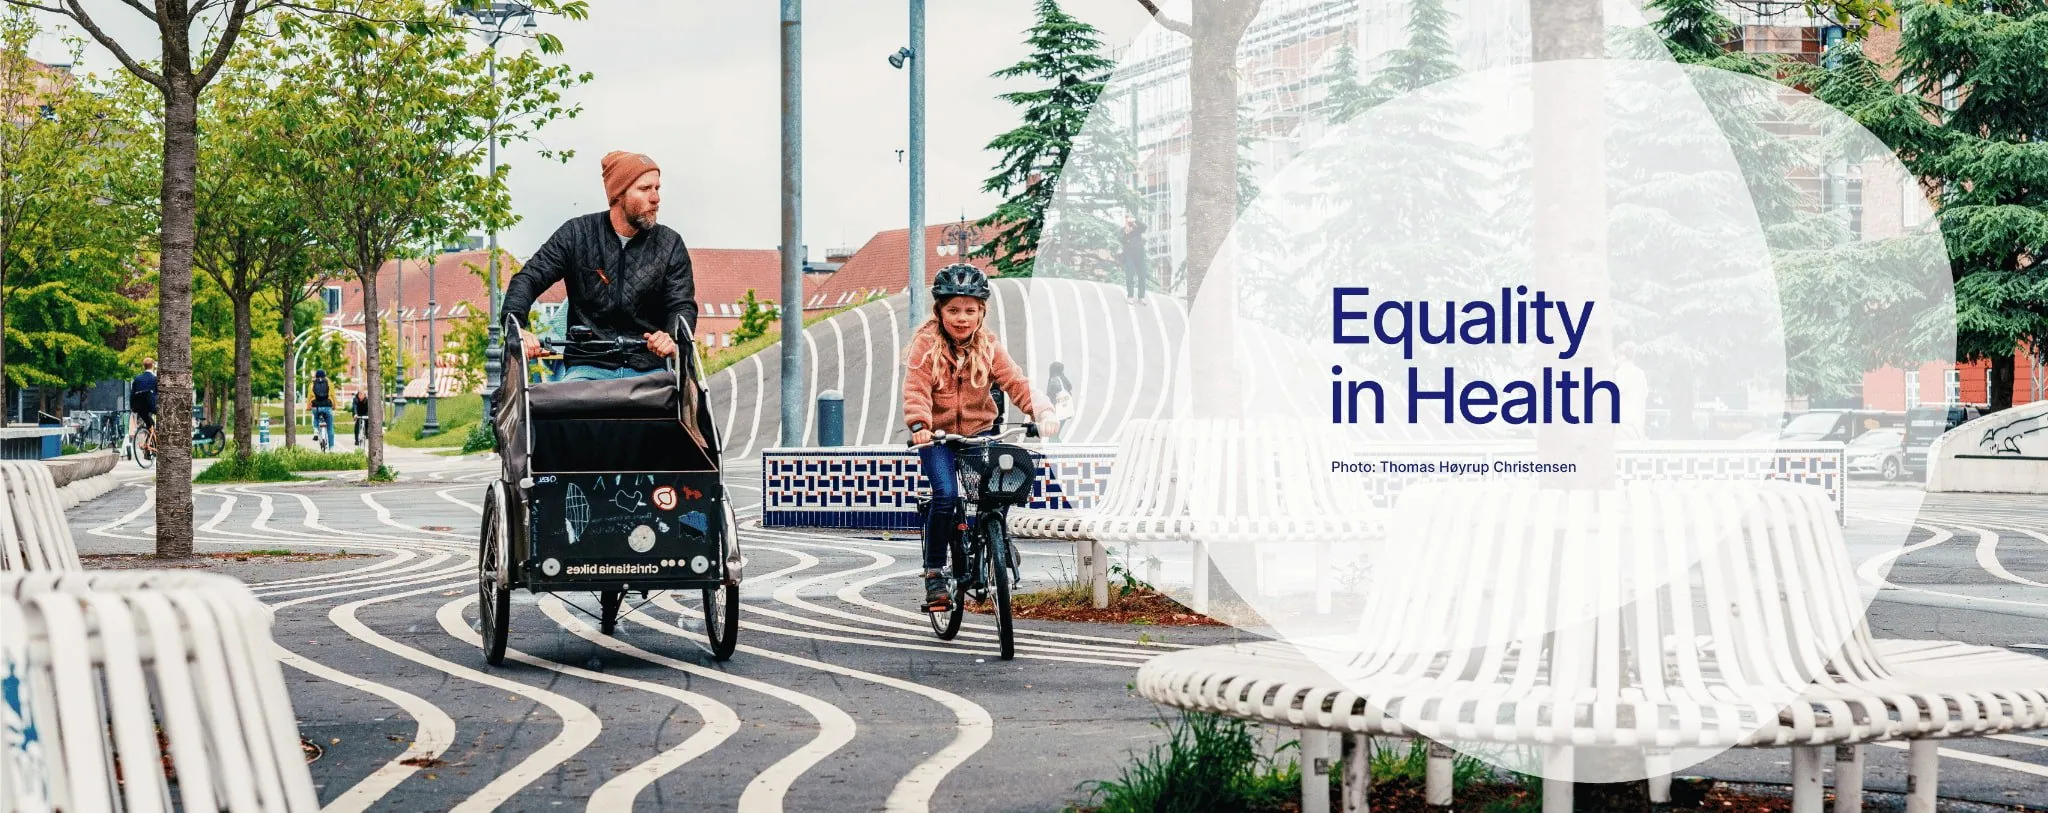 Equality in health - Man and child on bike